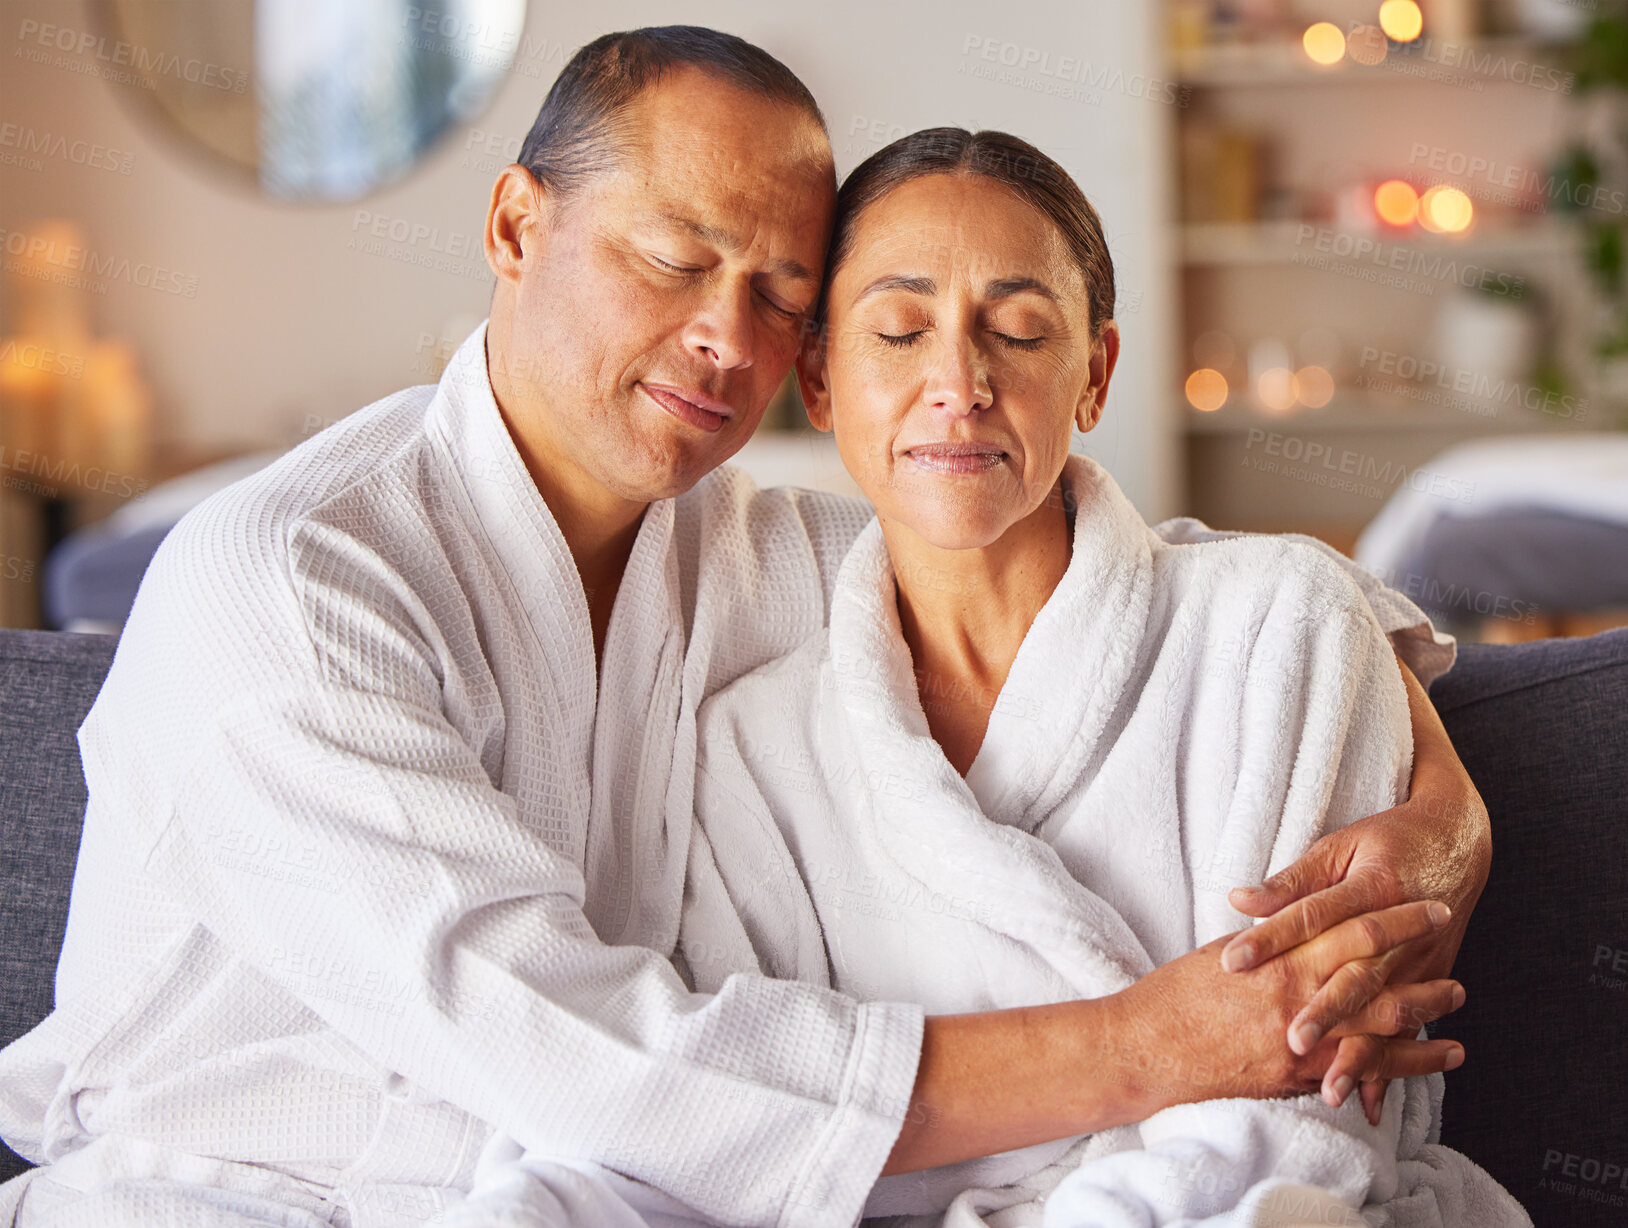 Buy stock photo Hug, relax and mature couple at a spa with zen, calm and stress free mindset before a treatment. Man and woman embracing with love while relaxing at luxury health, wellness and beauty salon together.